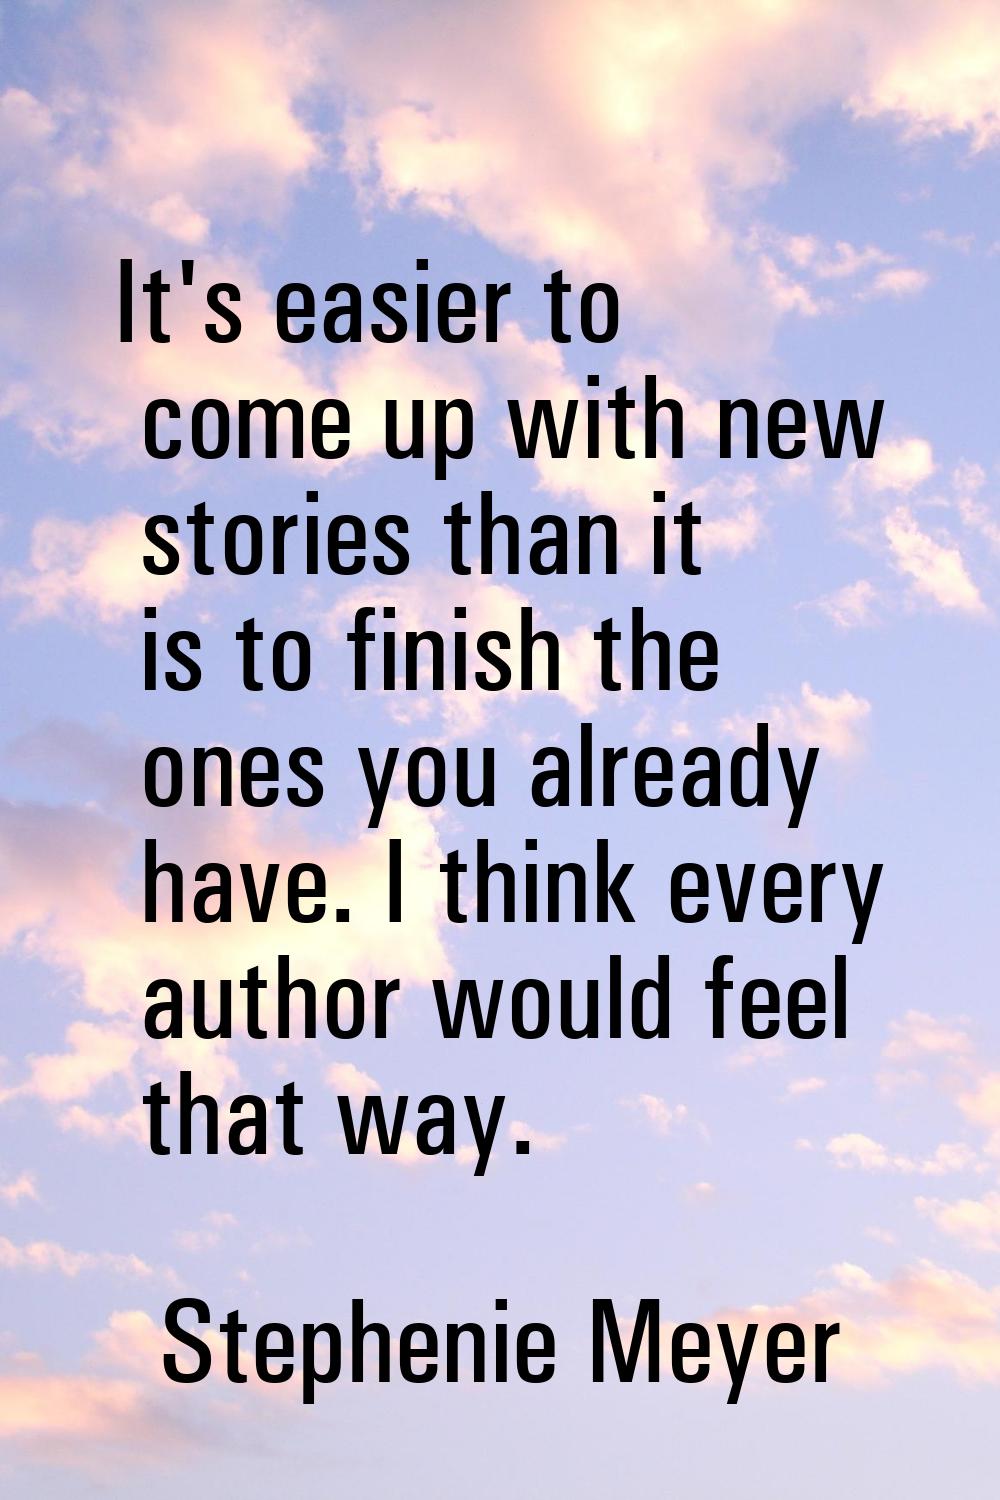 It's easier to come up with new stories than it is to finish the ones you already have. I think eve